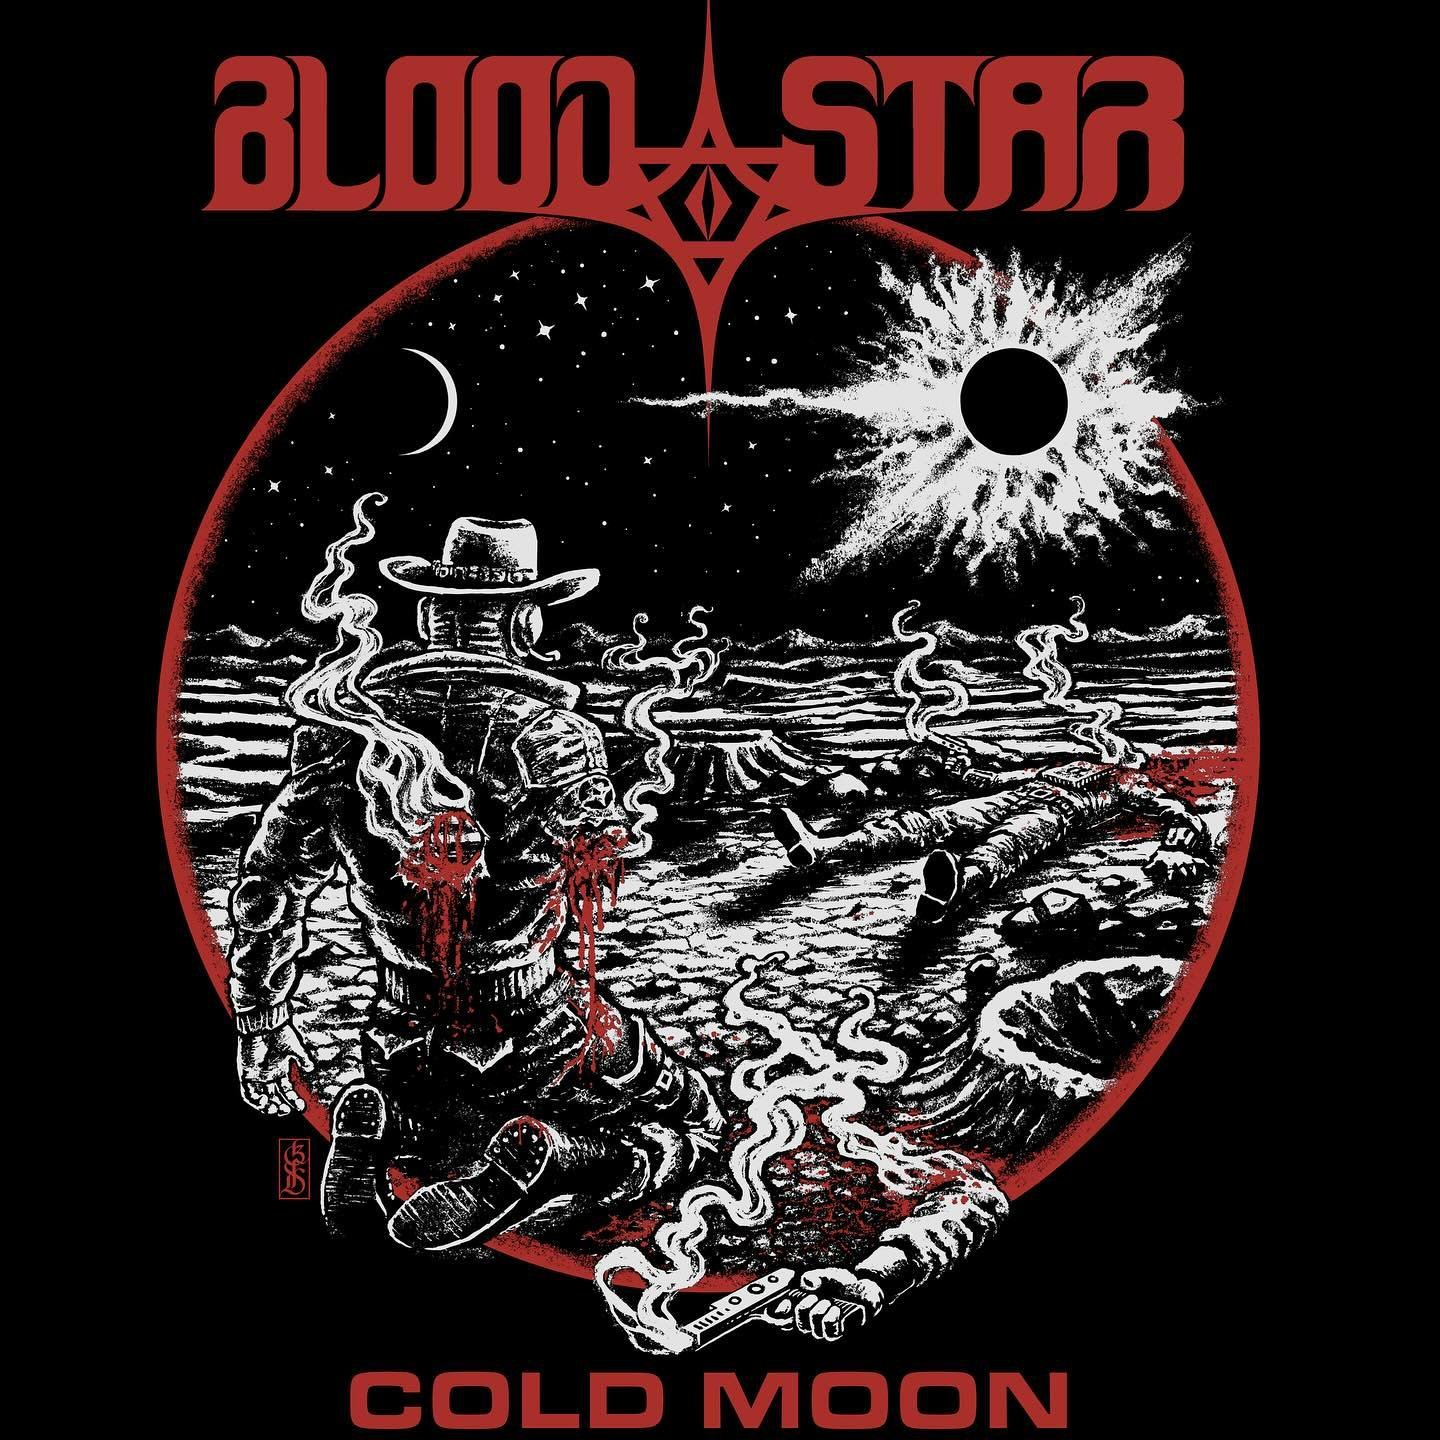 &quot;Bastard caught my bullet right between the eyes/
Told you I'd have you, though I ain't too far behind...
Under the cold, cold moon...&quot;
🪐🚀🔫🤠
Hey space mercenaries and interplanetary gunslingers! It's been a whole year since @blood.star.